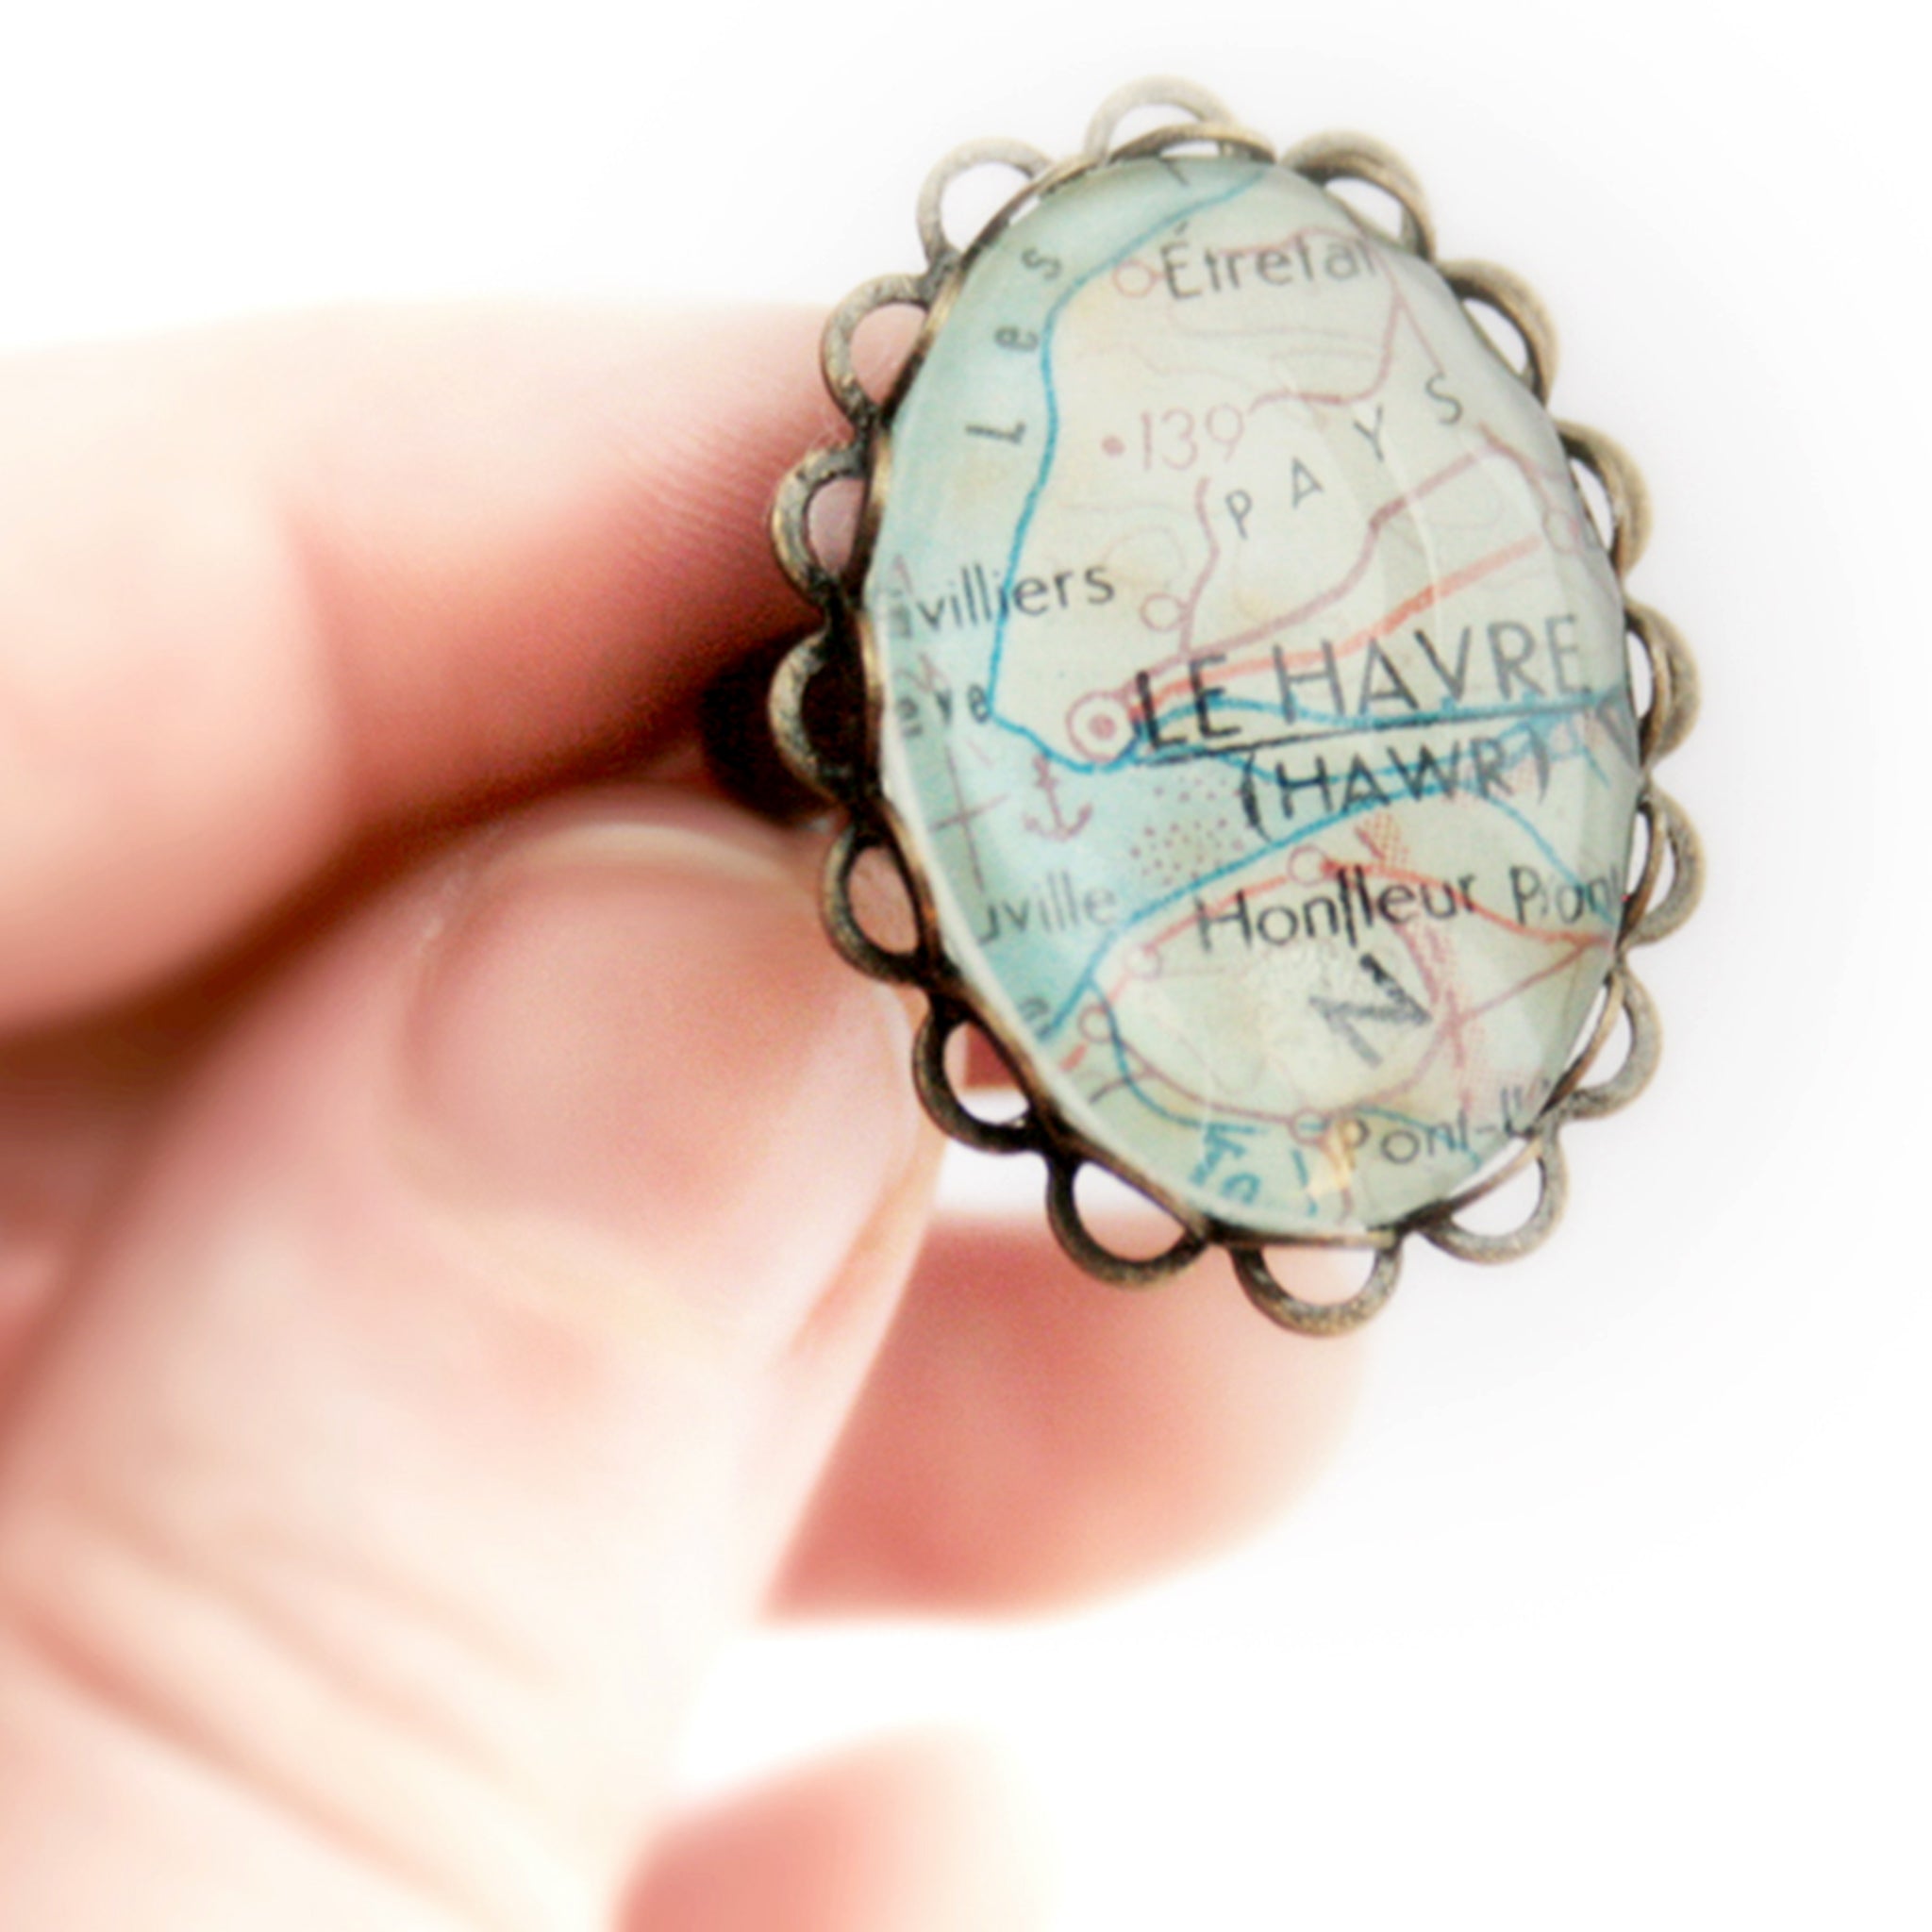 Hand holding Oval bronze personalised ring featuring map of Le Havre